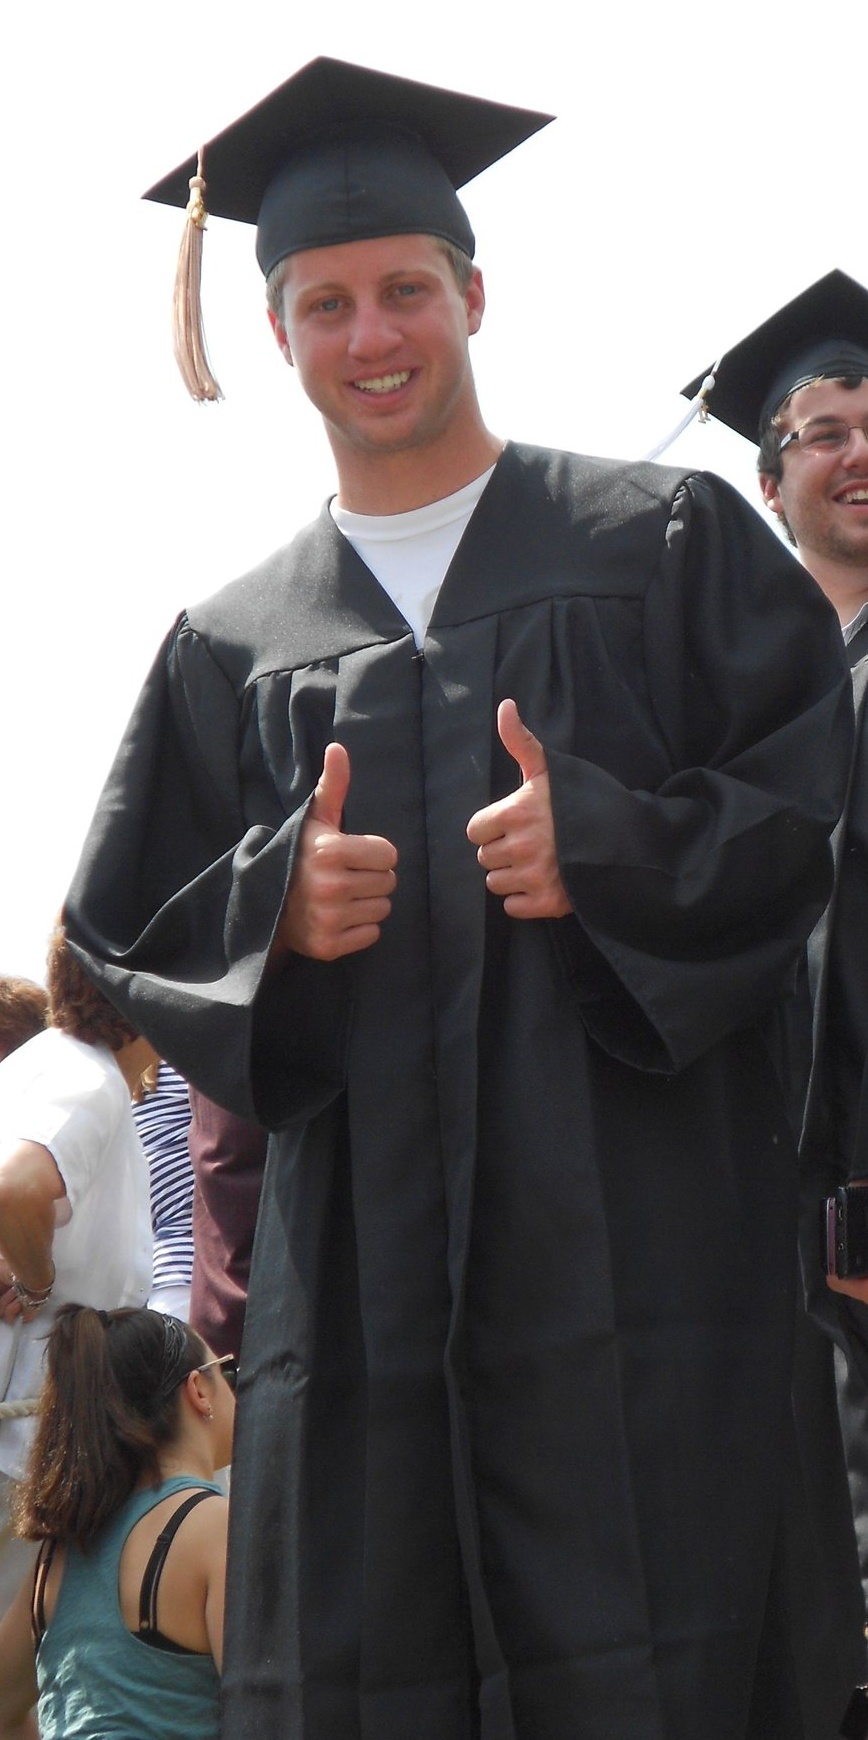 Brightergy employee Sam Field pictured on graduation day.